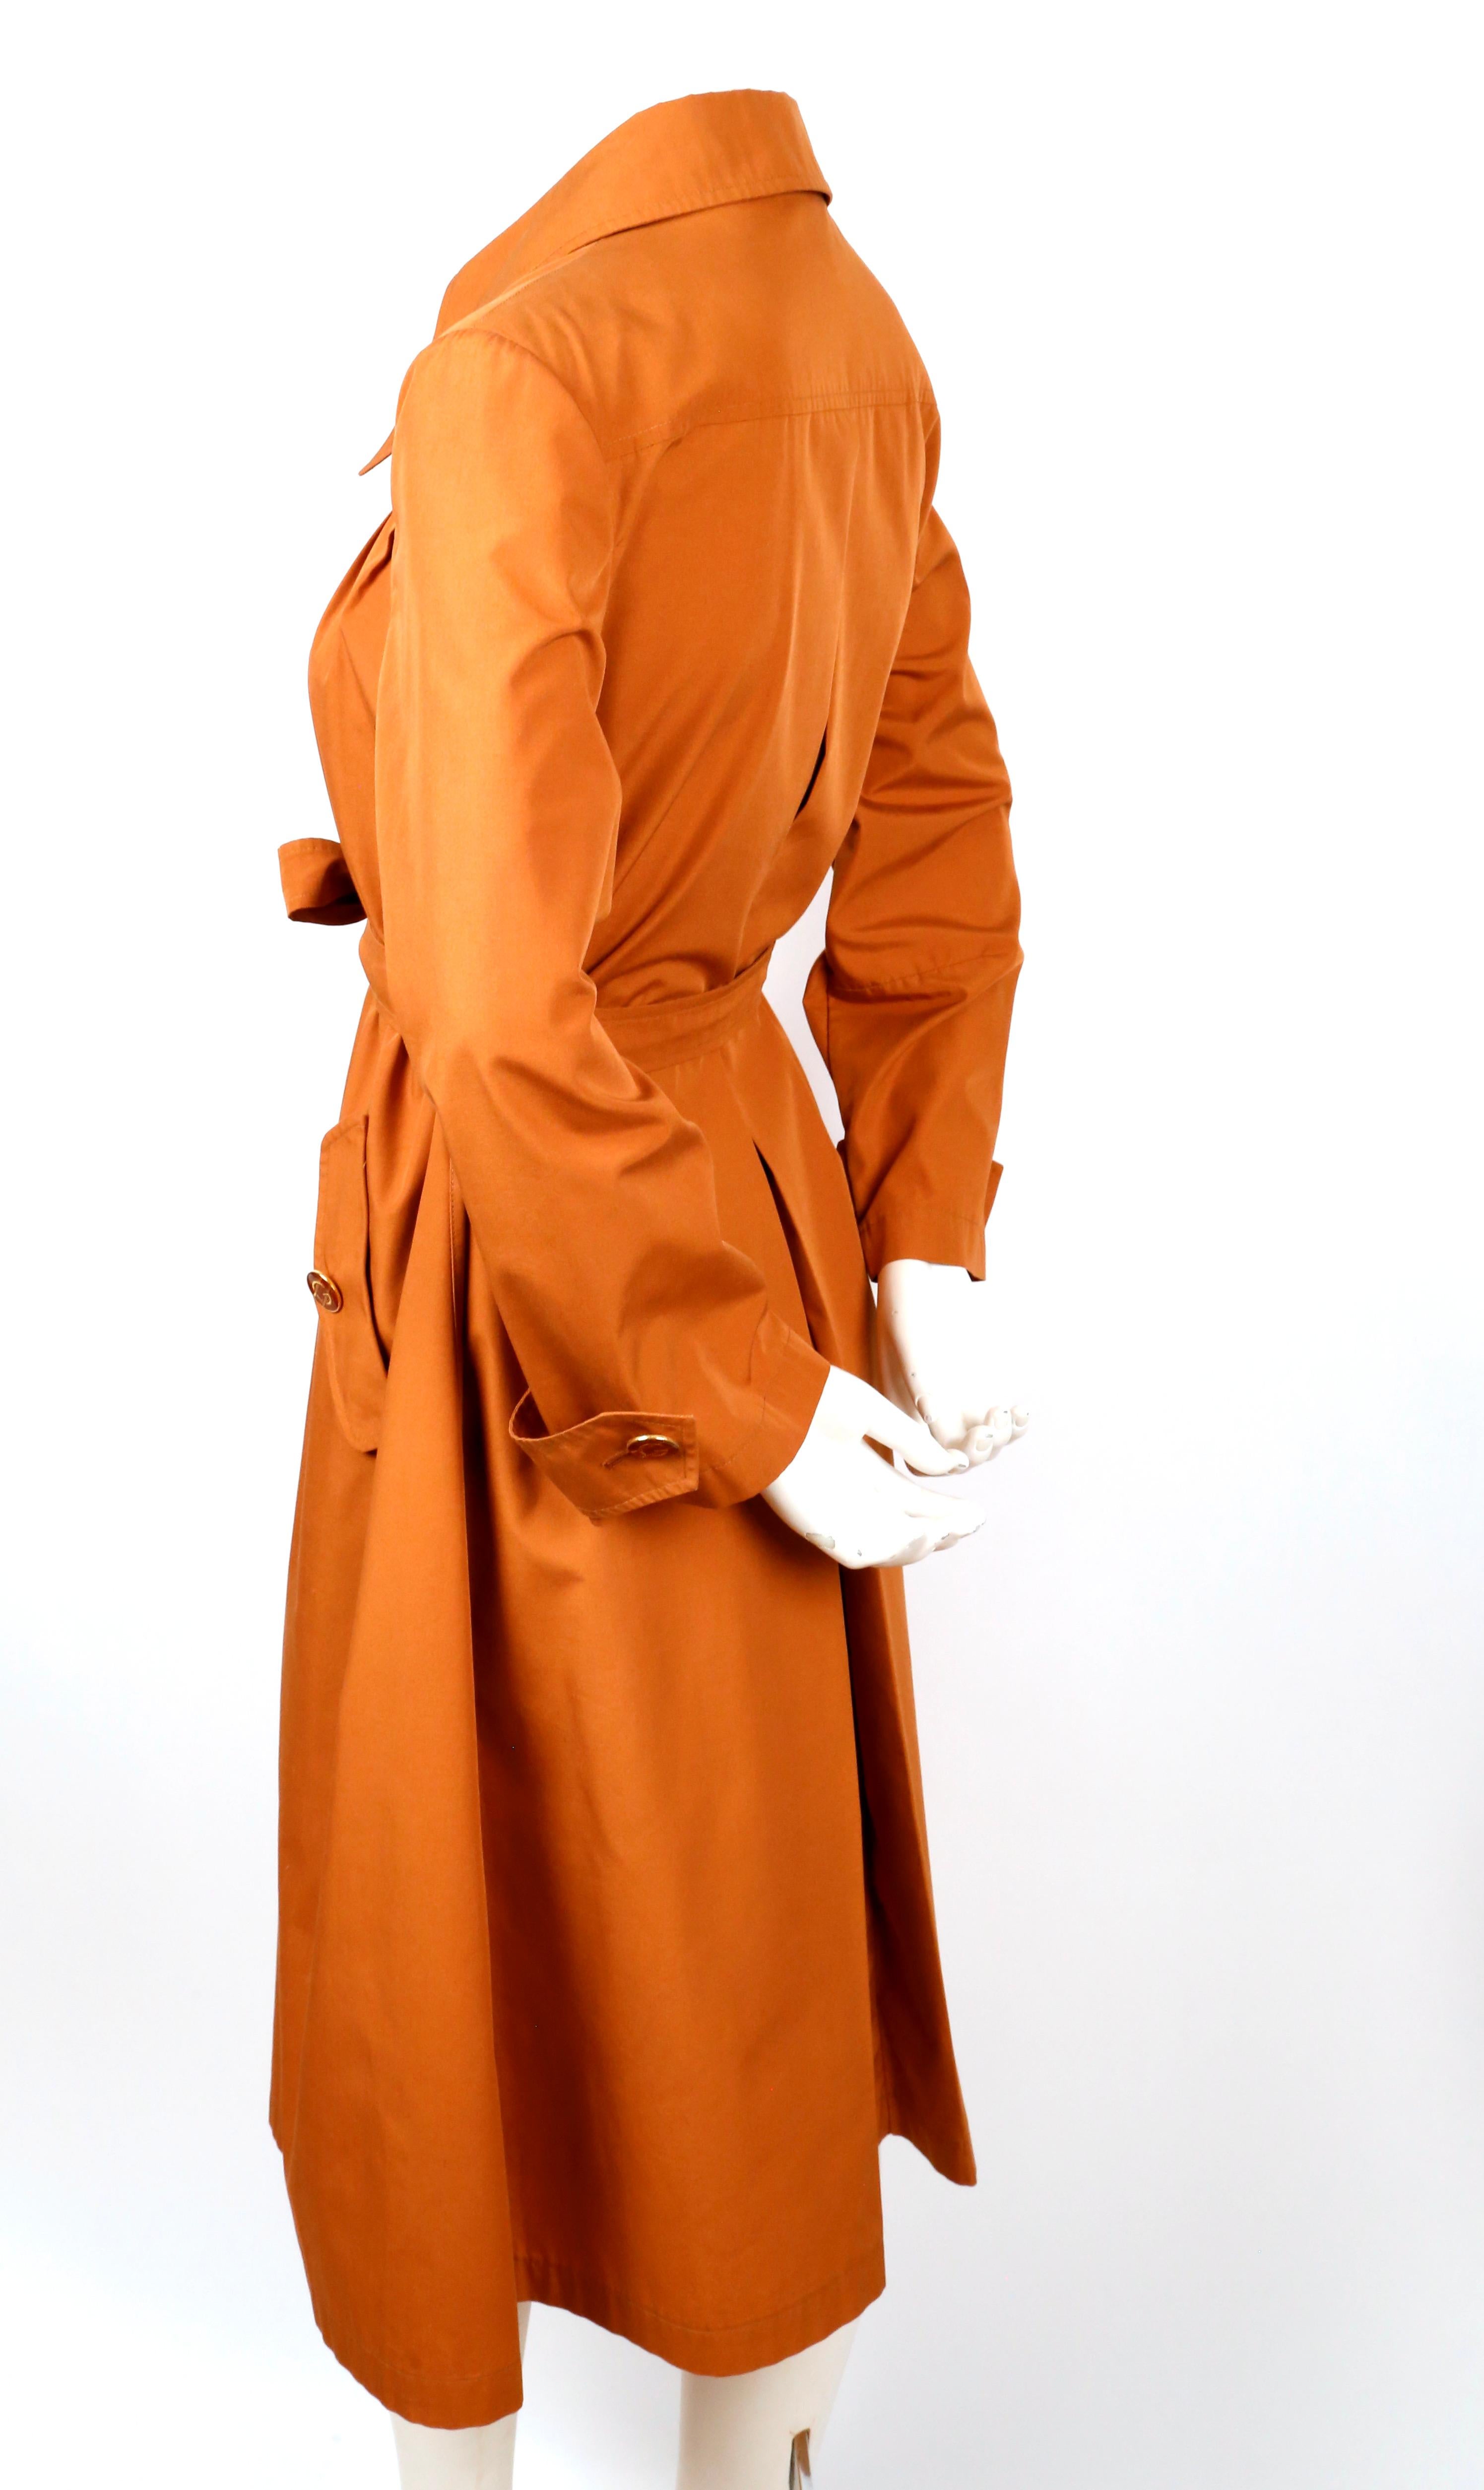 Very rare, rust colored trench coat with enameled GG buttons designed by Gucci dating to the 1970's. Labeled an Italian 46, however this best fits a US 2-6. Approximate measurements: shoulder 15